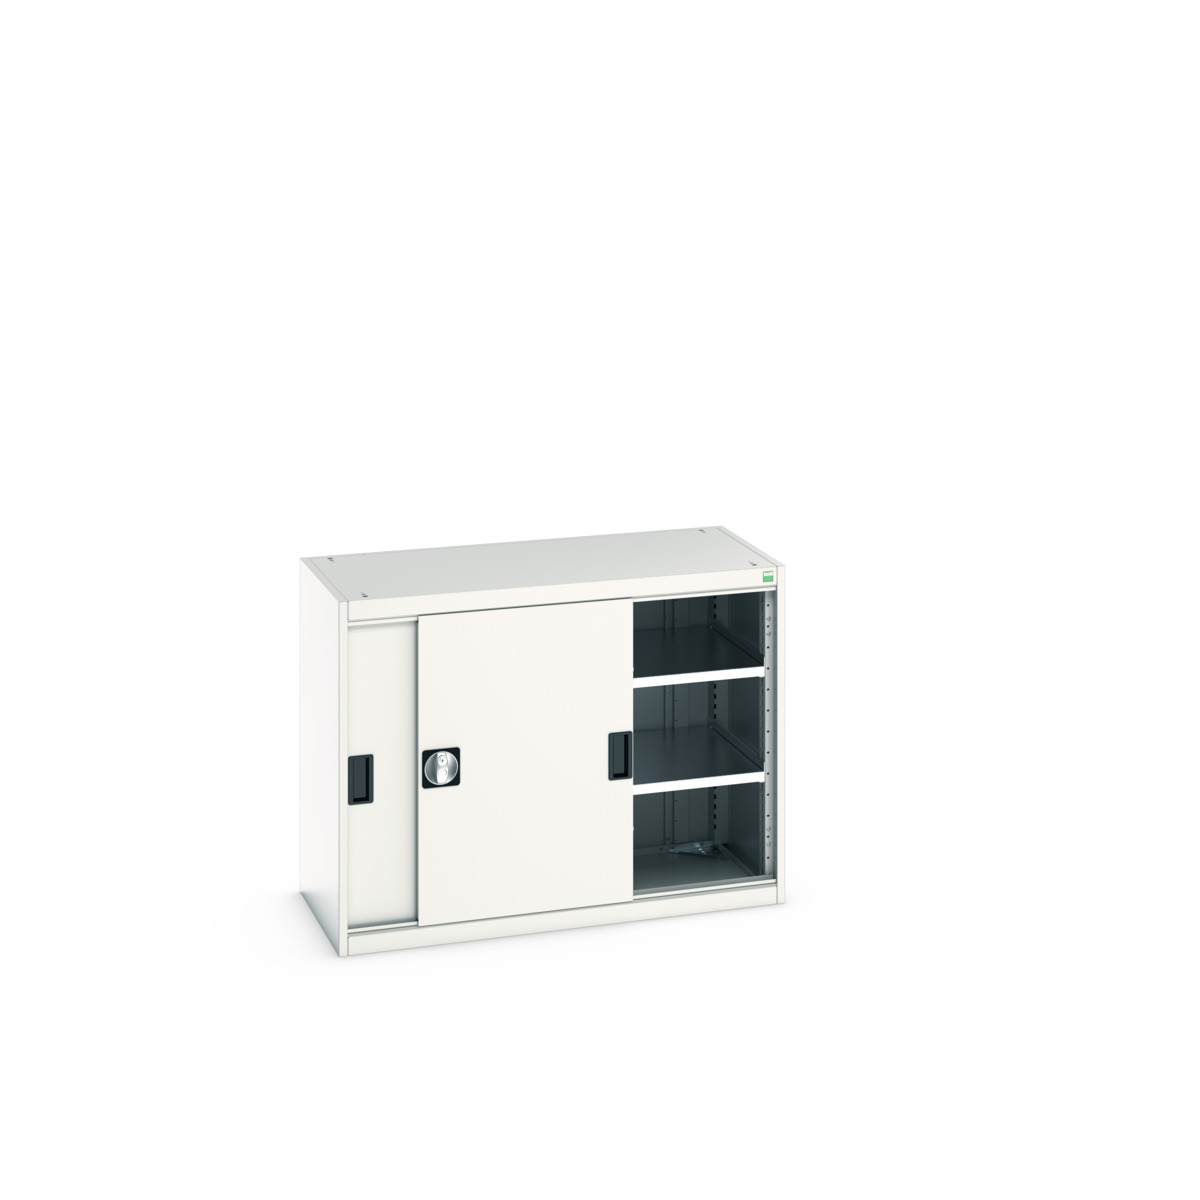 40013067.16V - Armoire Cubio SMS-108-1.1